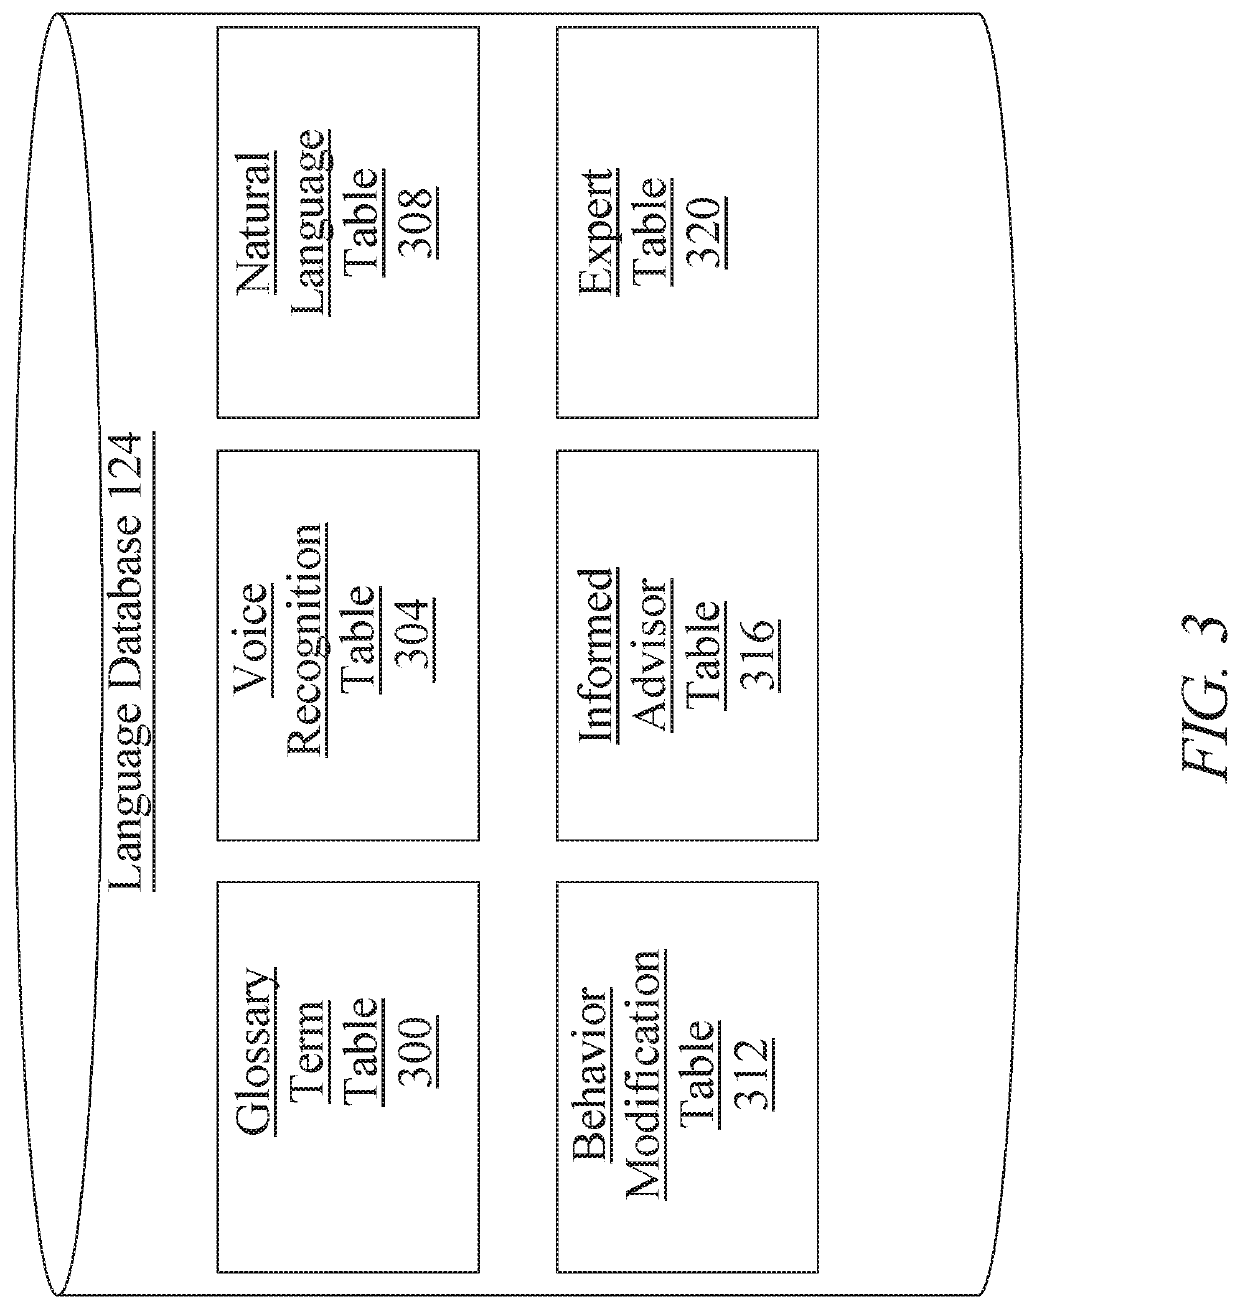 Methods and systems for automated analysis of behavior modification data